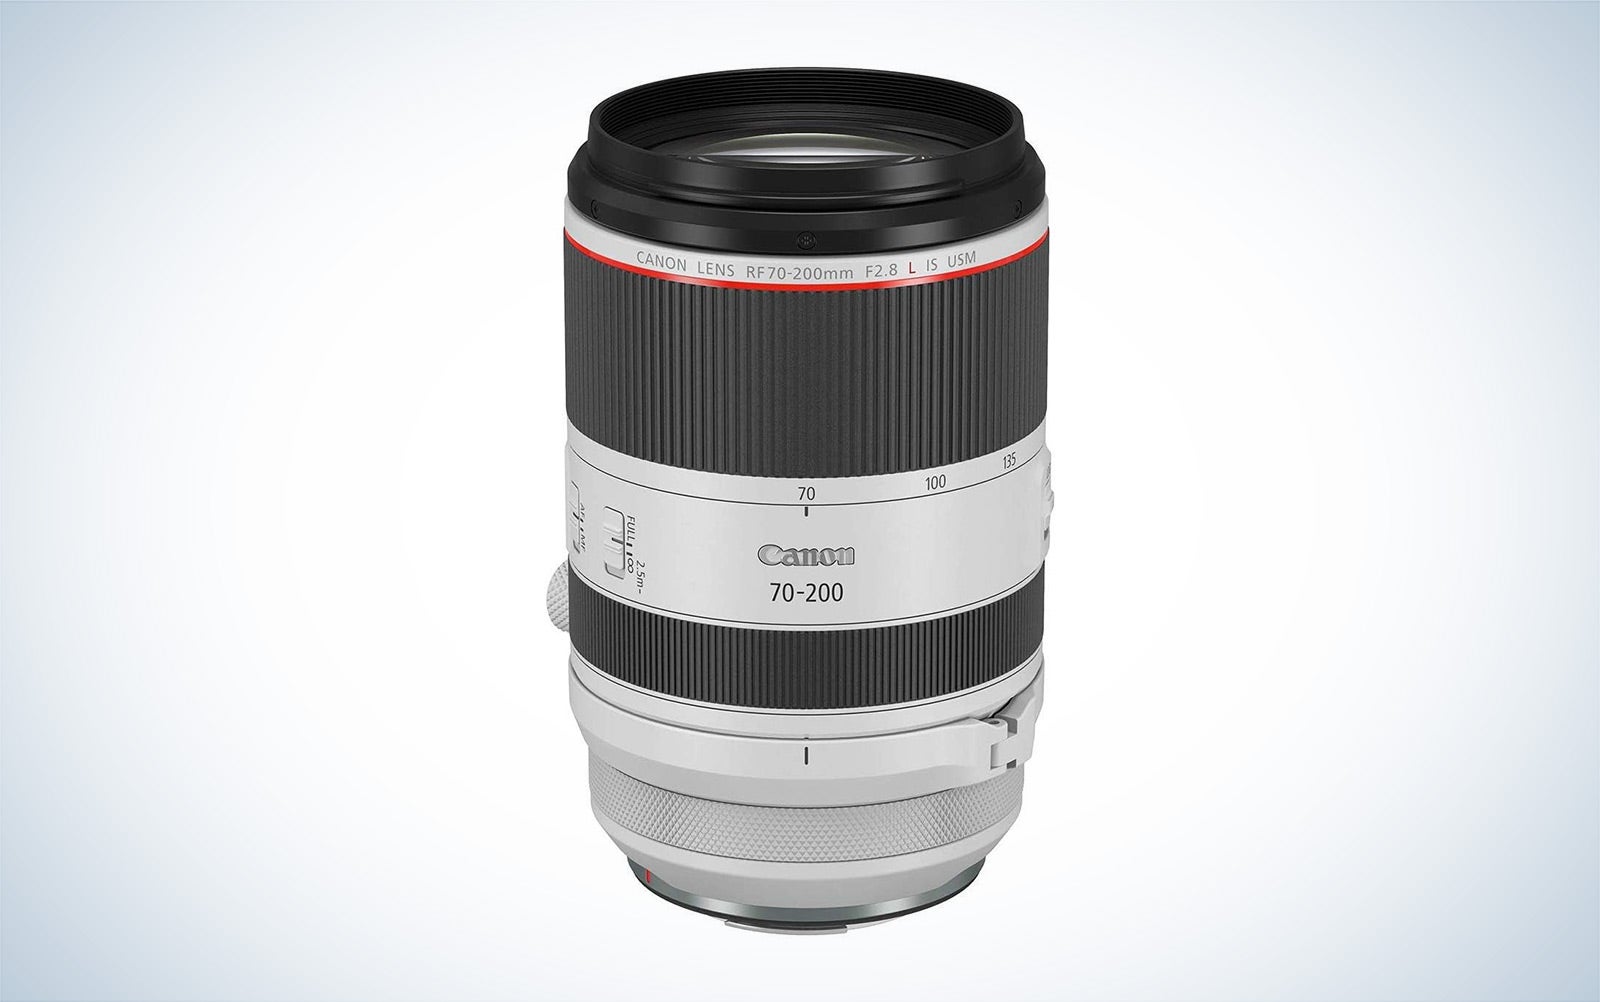 Canon RF 70-200mm f/2.8 L IS